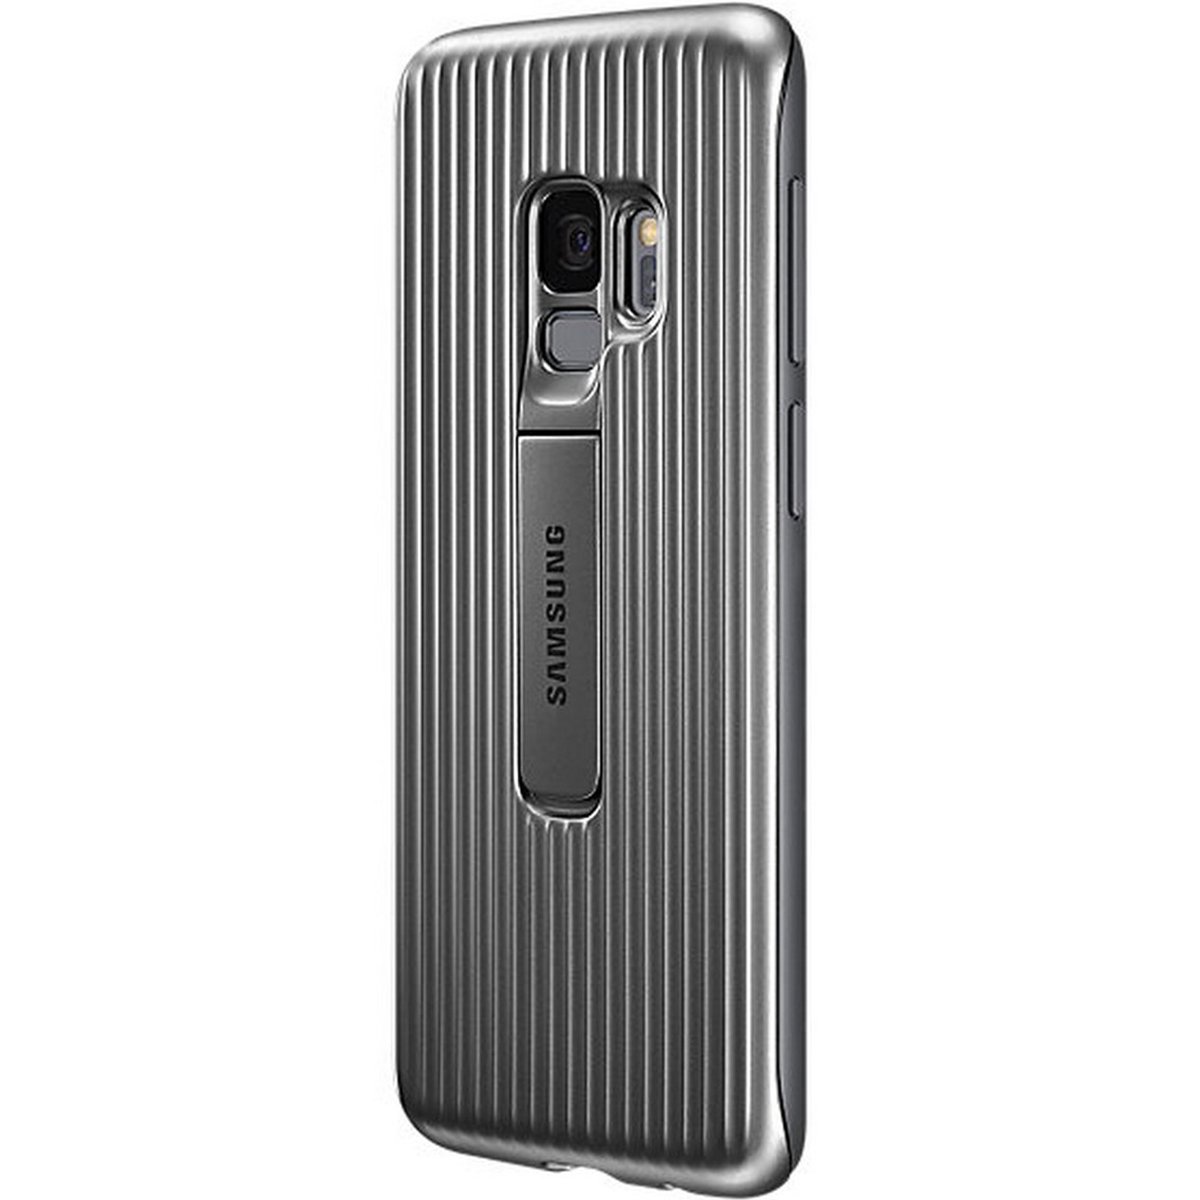 Samsung Galaxy S9 Protective Standing Cover Silver EF-RG960CSEGWW